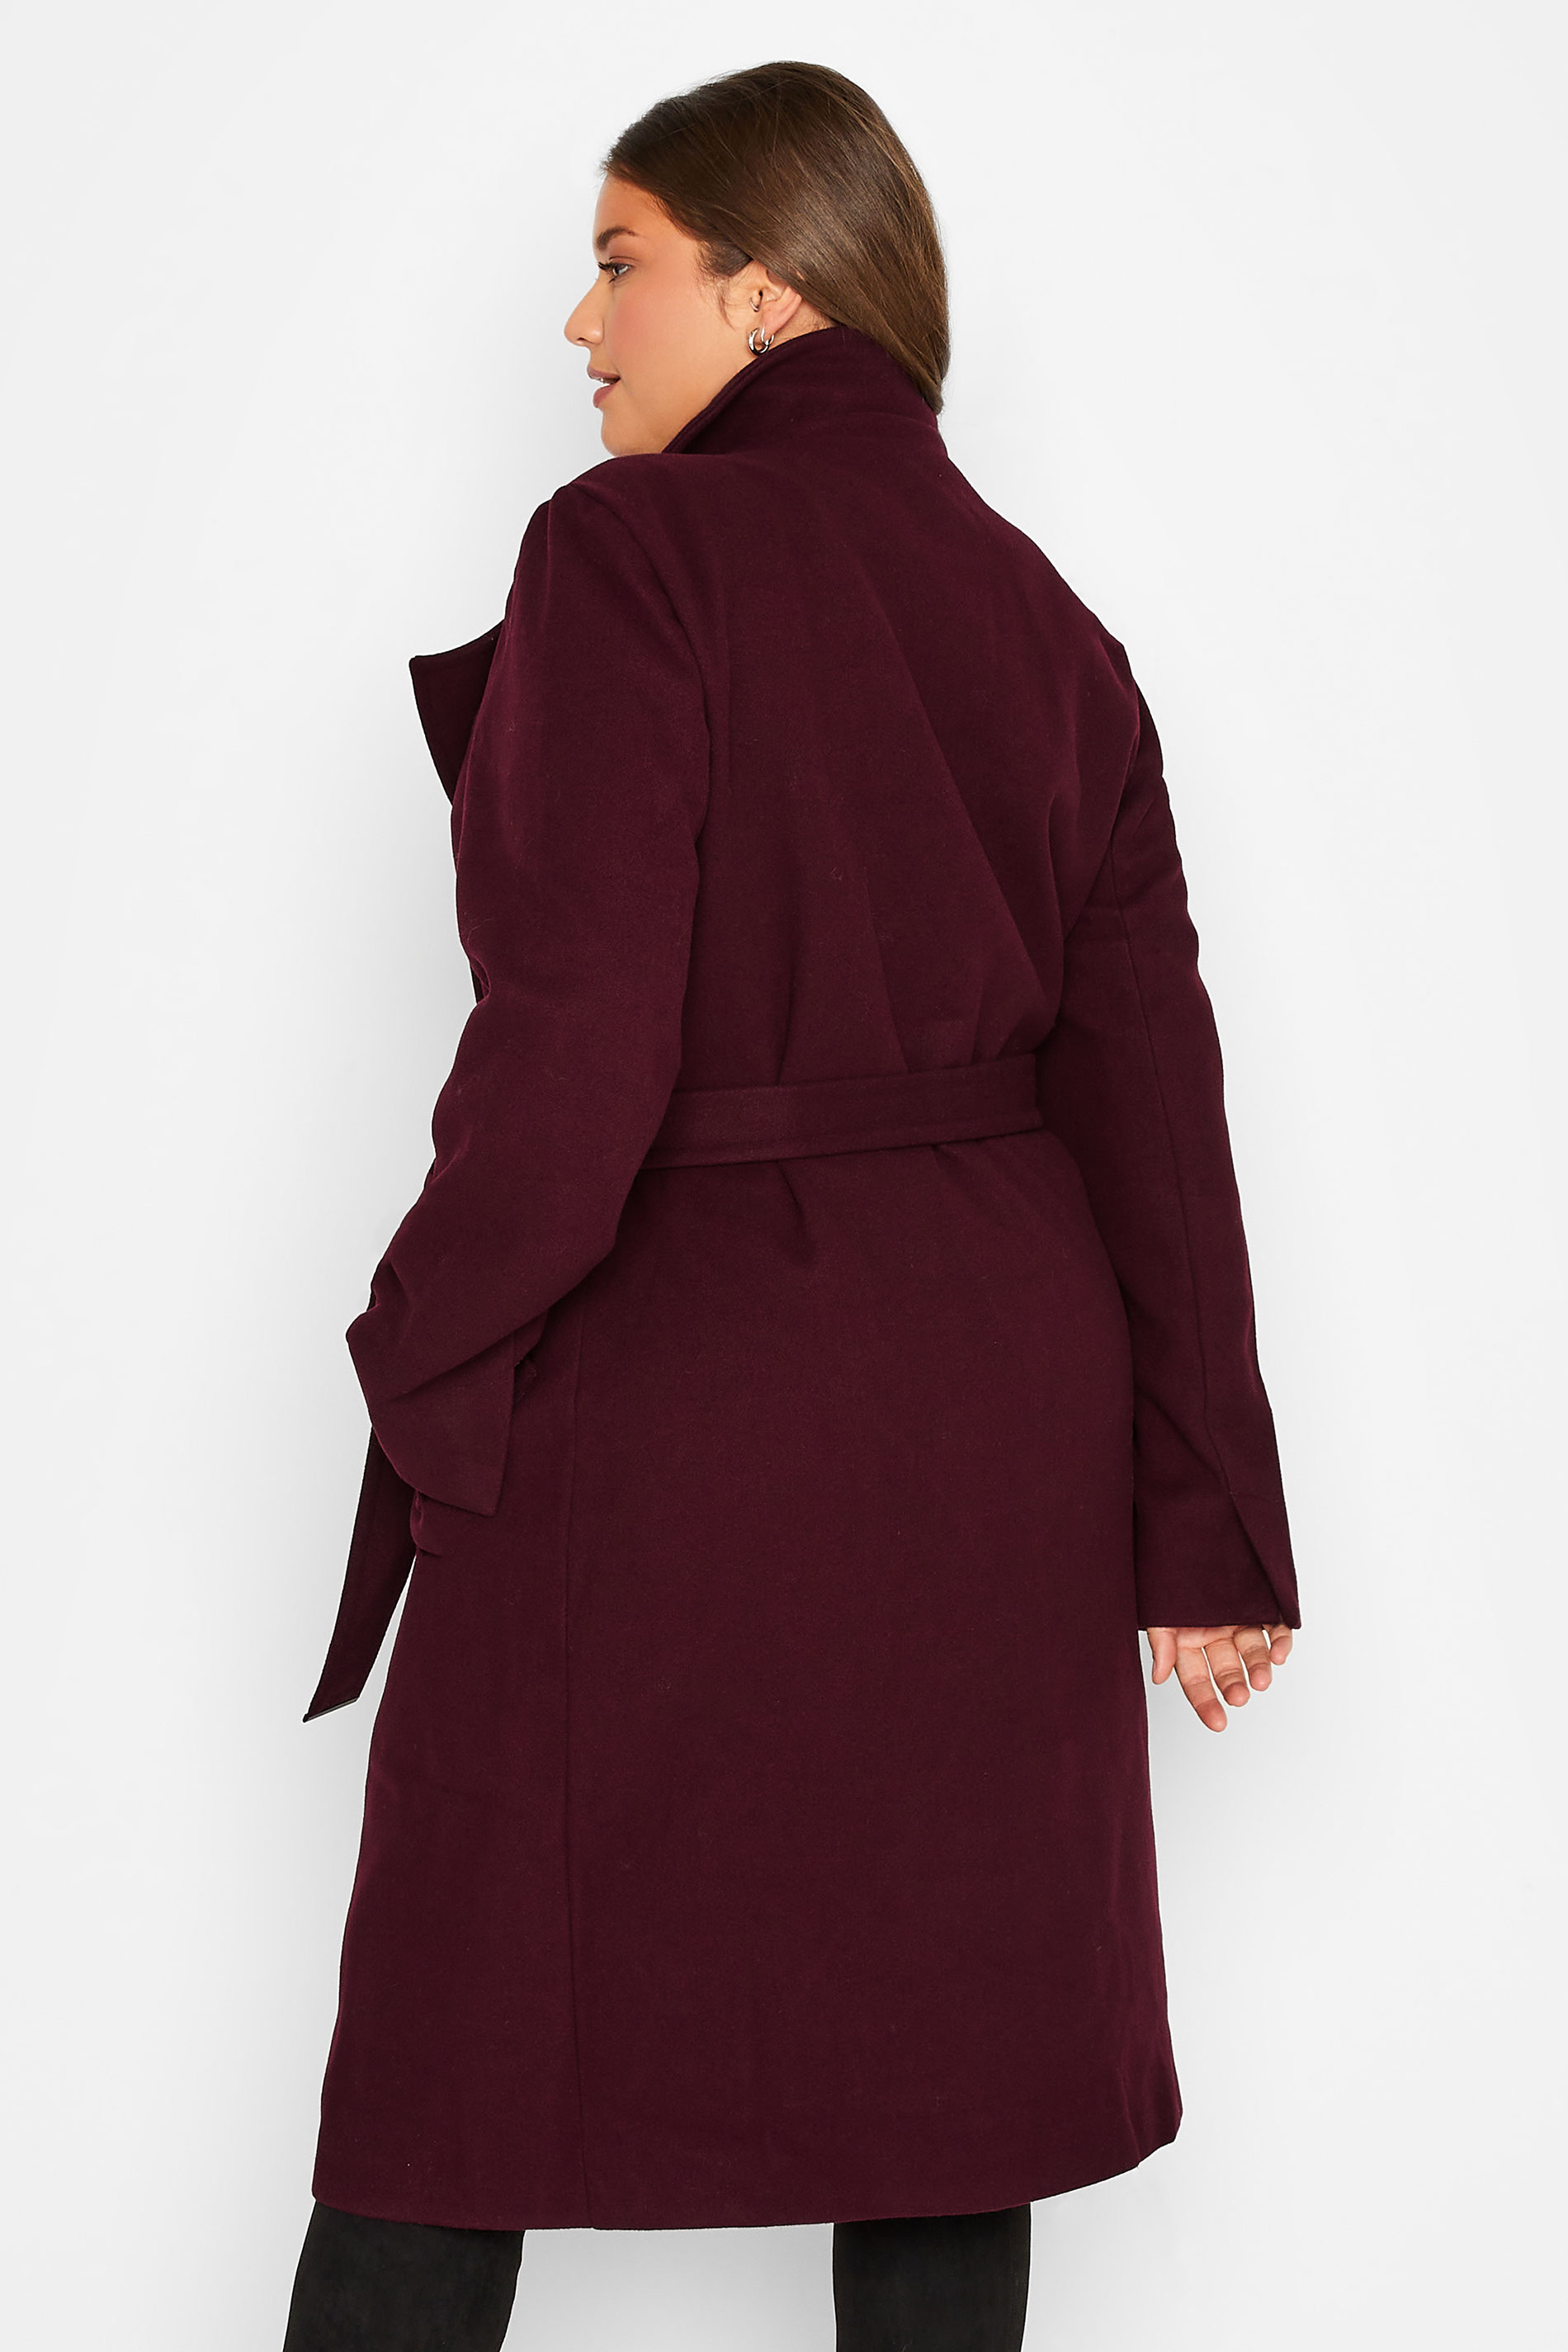 LTS Tall Women's Burgundy Red Belted Coat | Long Tall Sally 3